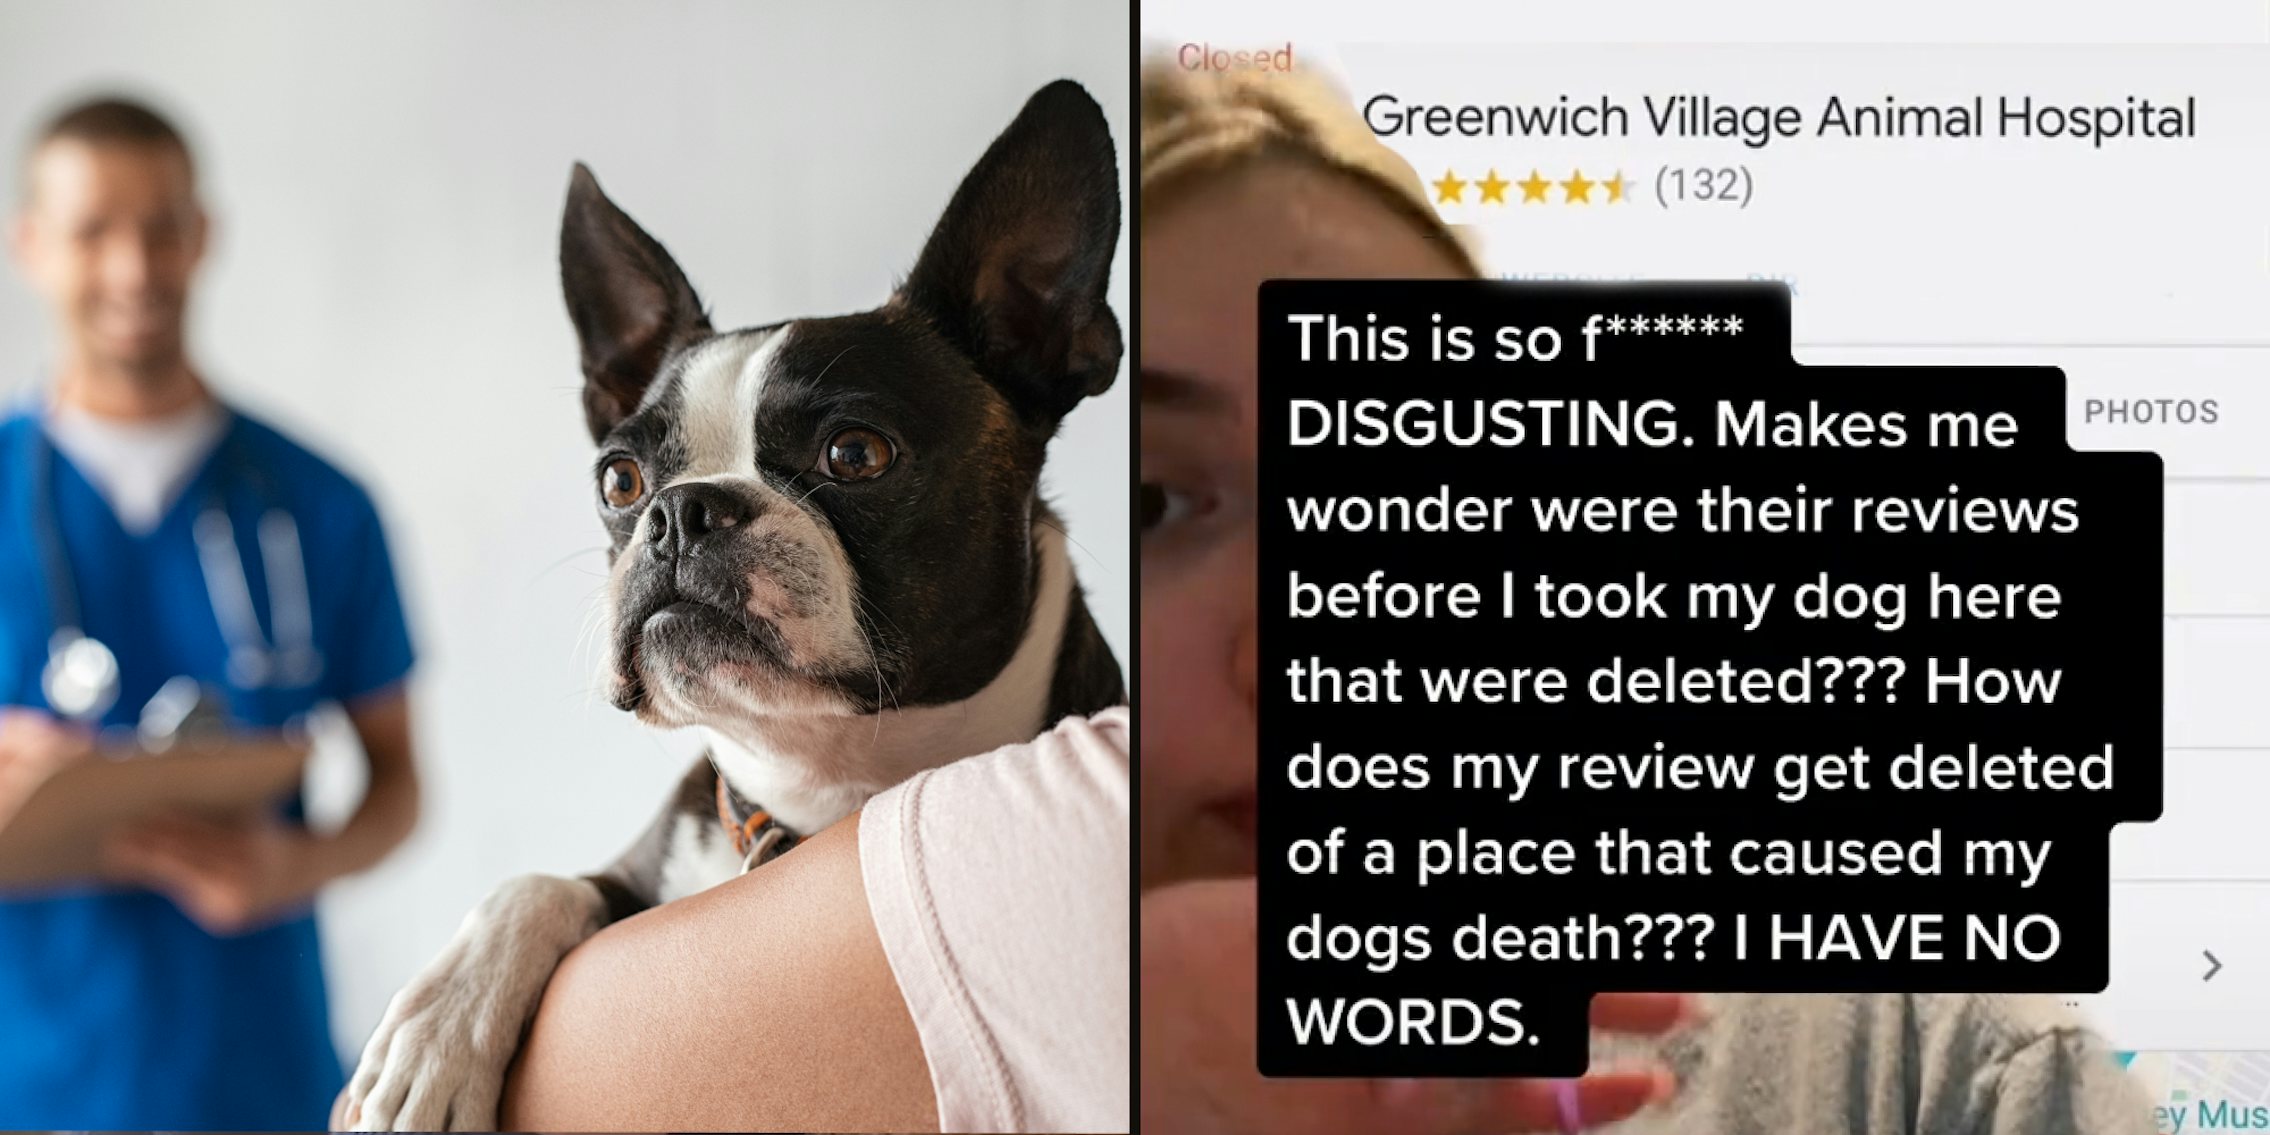 Woman holding dog vet blurred in background (l) Woamn greenscreen tiktok over vet google search caption ' This is so fucking DISGUSTING> Makes me wonder were their reviews before I took my dog here that were deleted??? How does my review get deleted of a place that caused my dogs death??? I HAVE NO WORDS.' (r)'